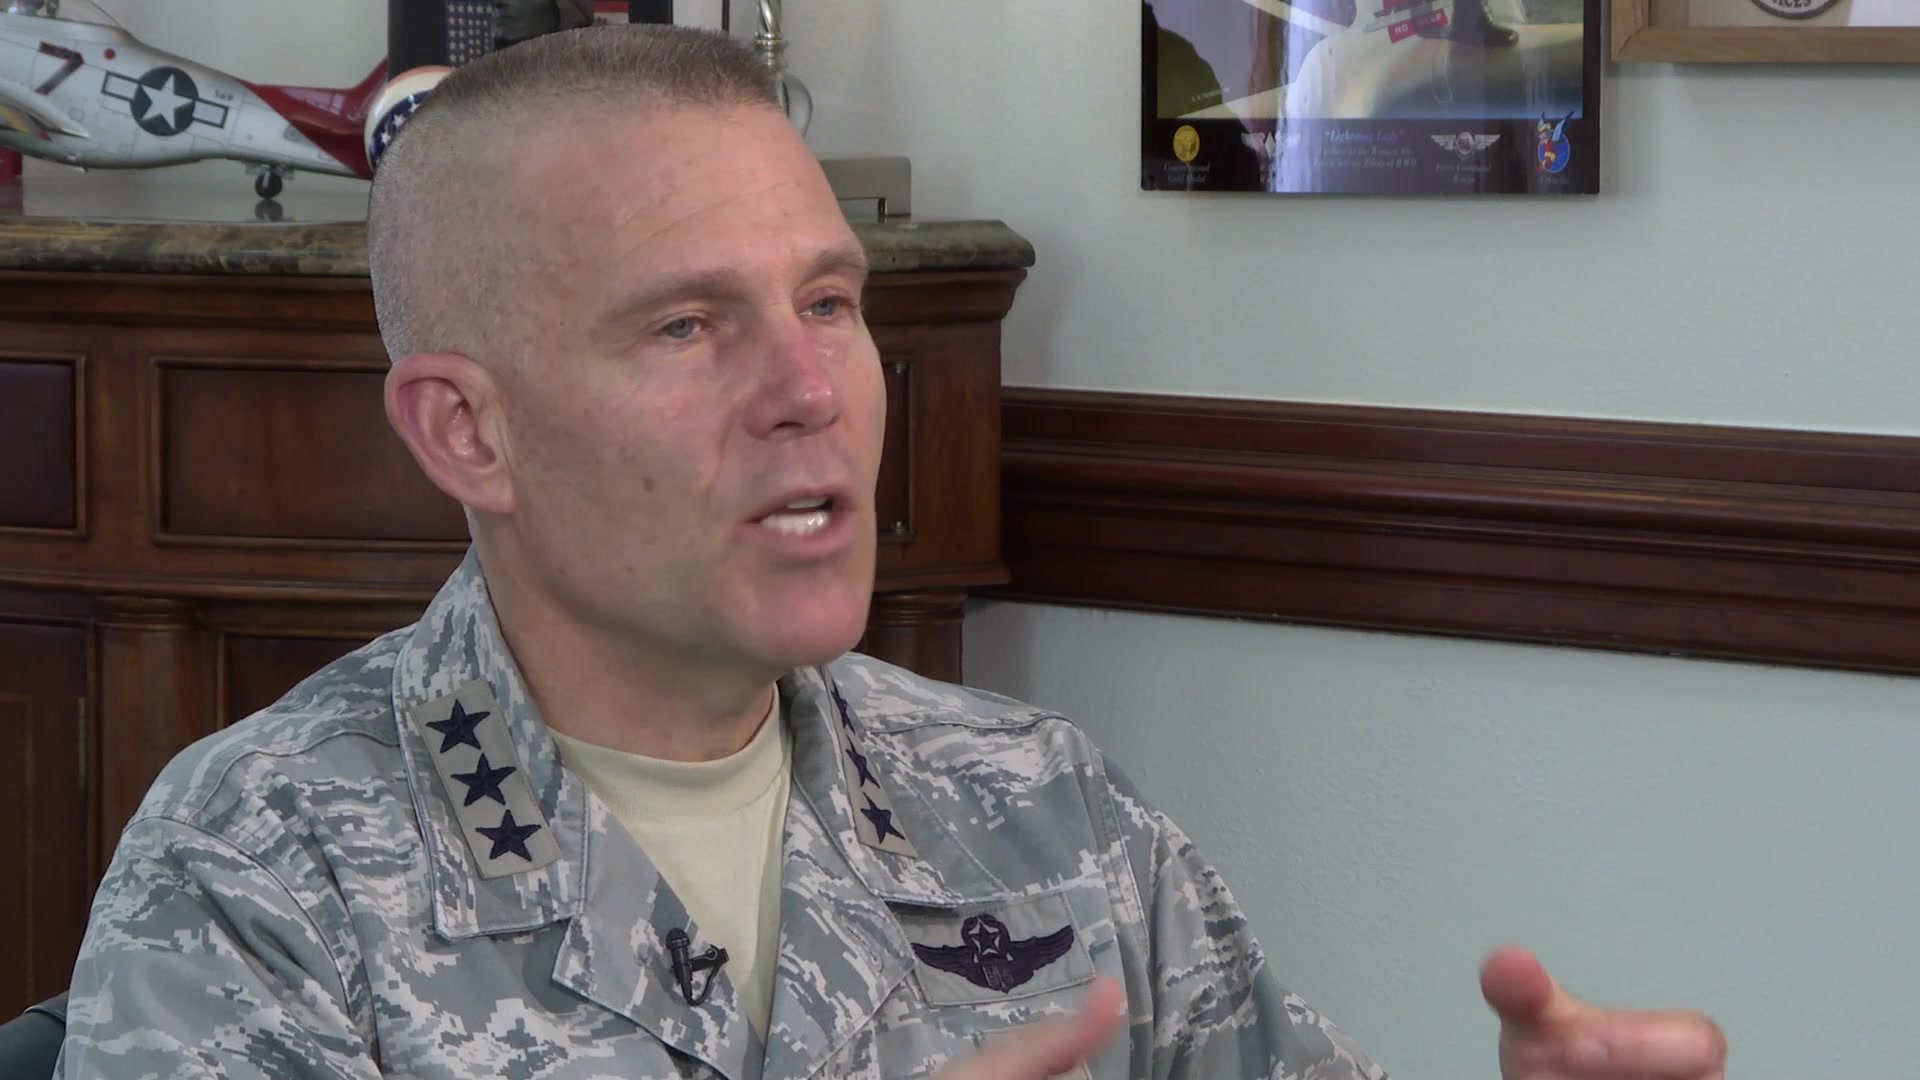 STATE OF AETC: Check out how Lt. Gen. Steve Kwast, commander of Air Education and Training Command, views failure as an opportunity to discover new ways to tackle problems!